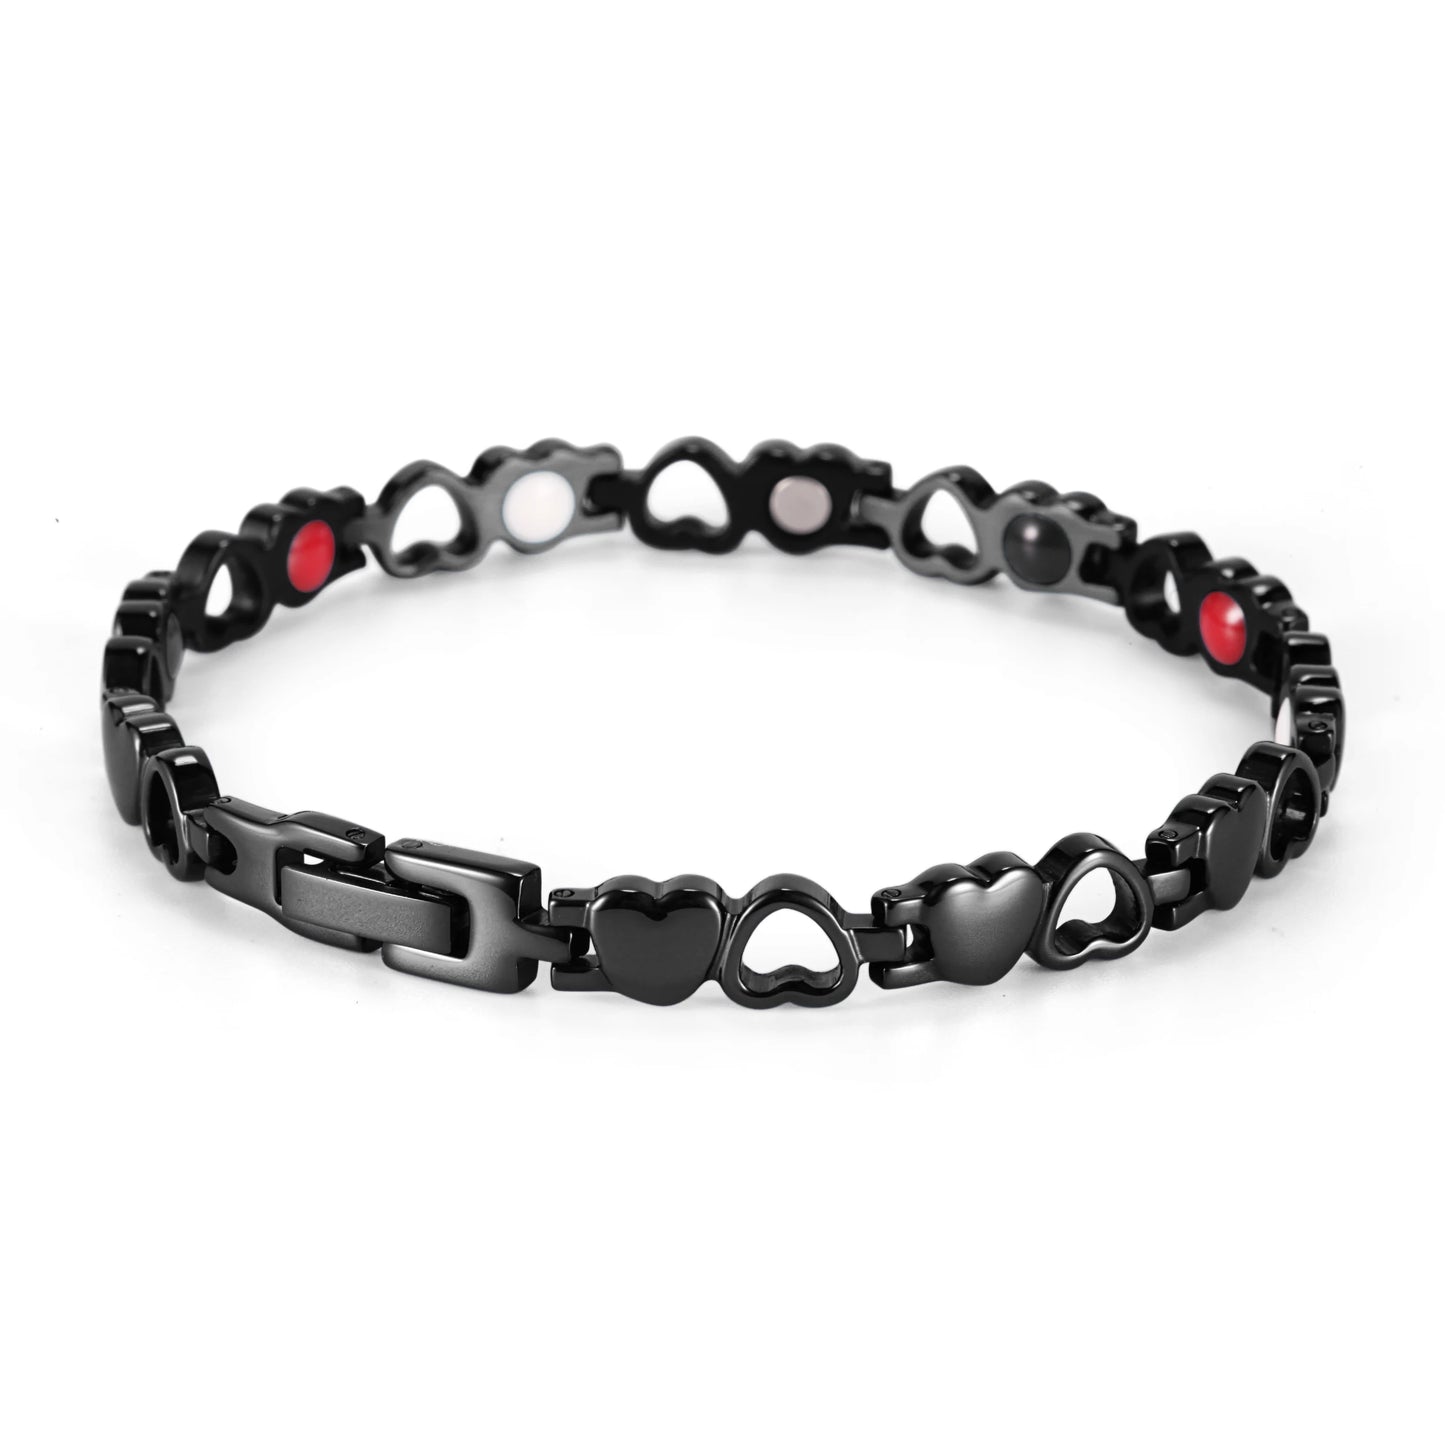 Weight Loss Titanium Magnetic Therapy Anklet for Women (Black)